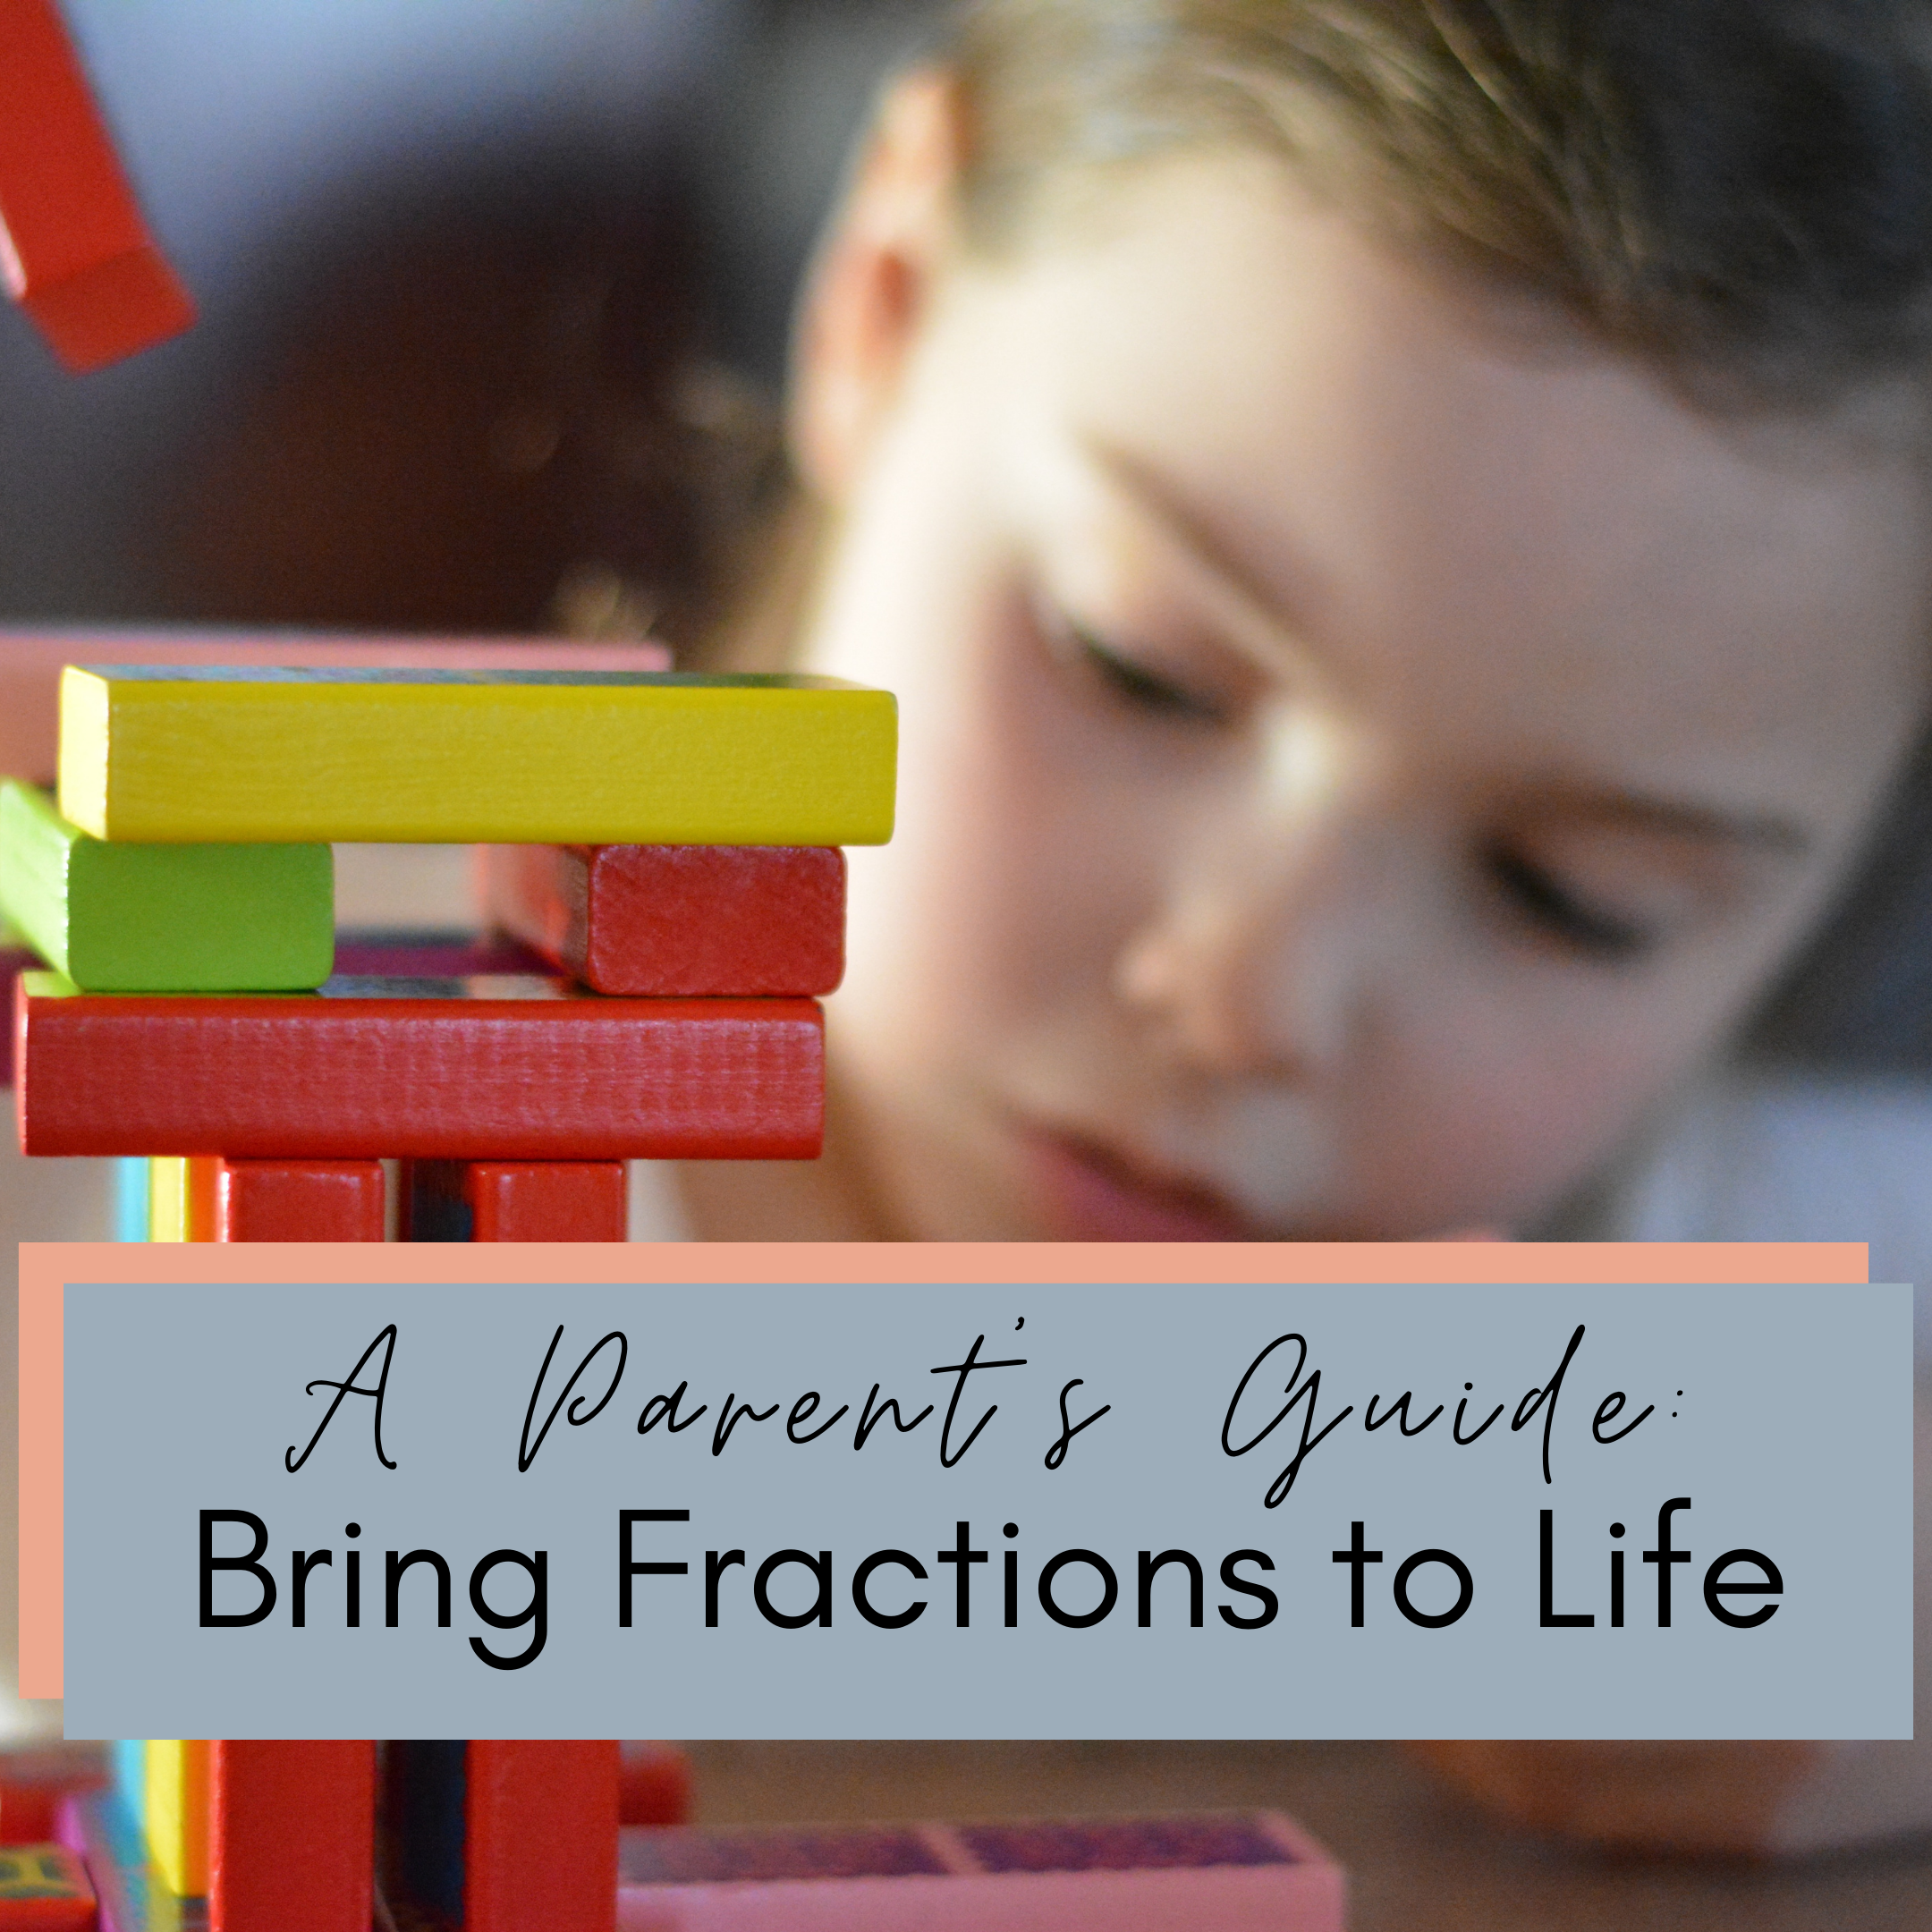 Fractions to life